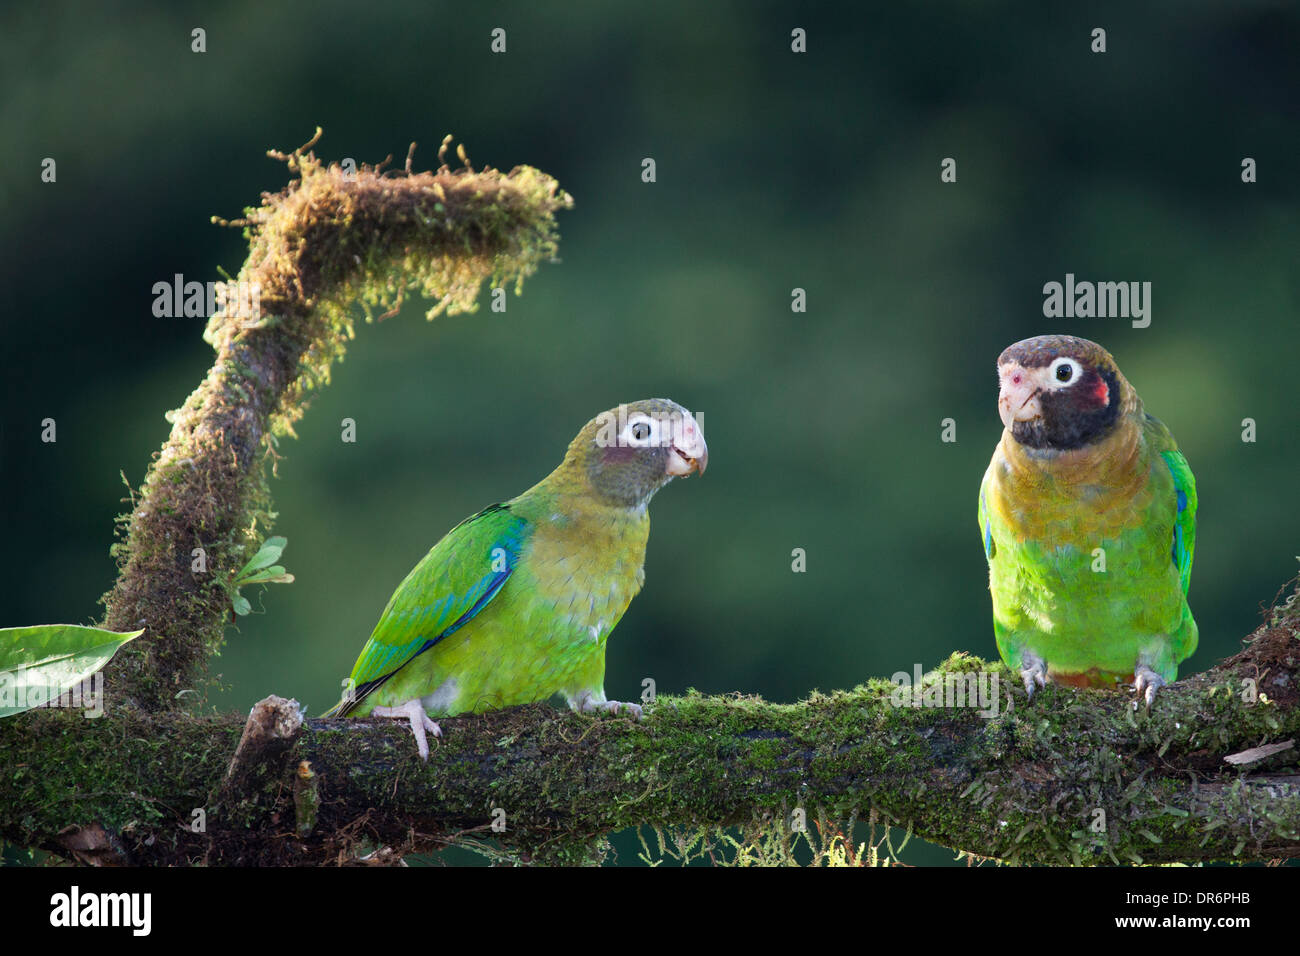 Brown-hooded Parrots (Pyrilia haematotis) perched on tree branch Stock Photo